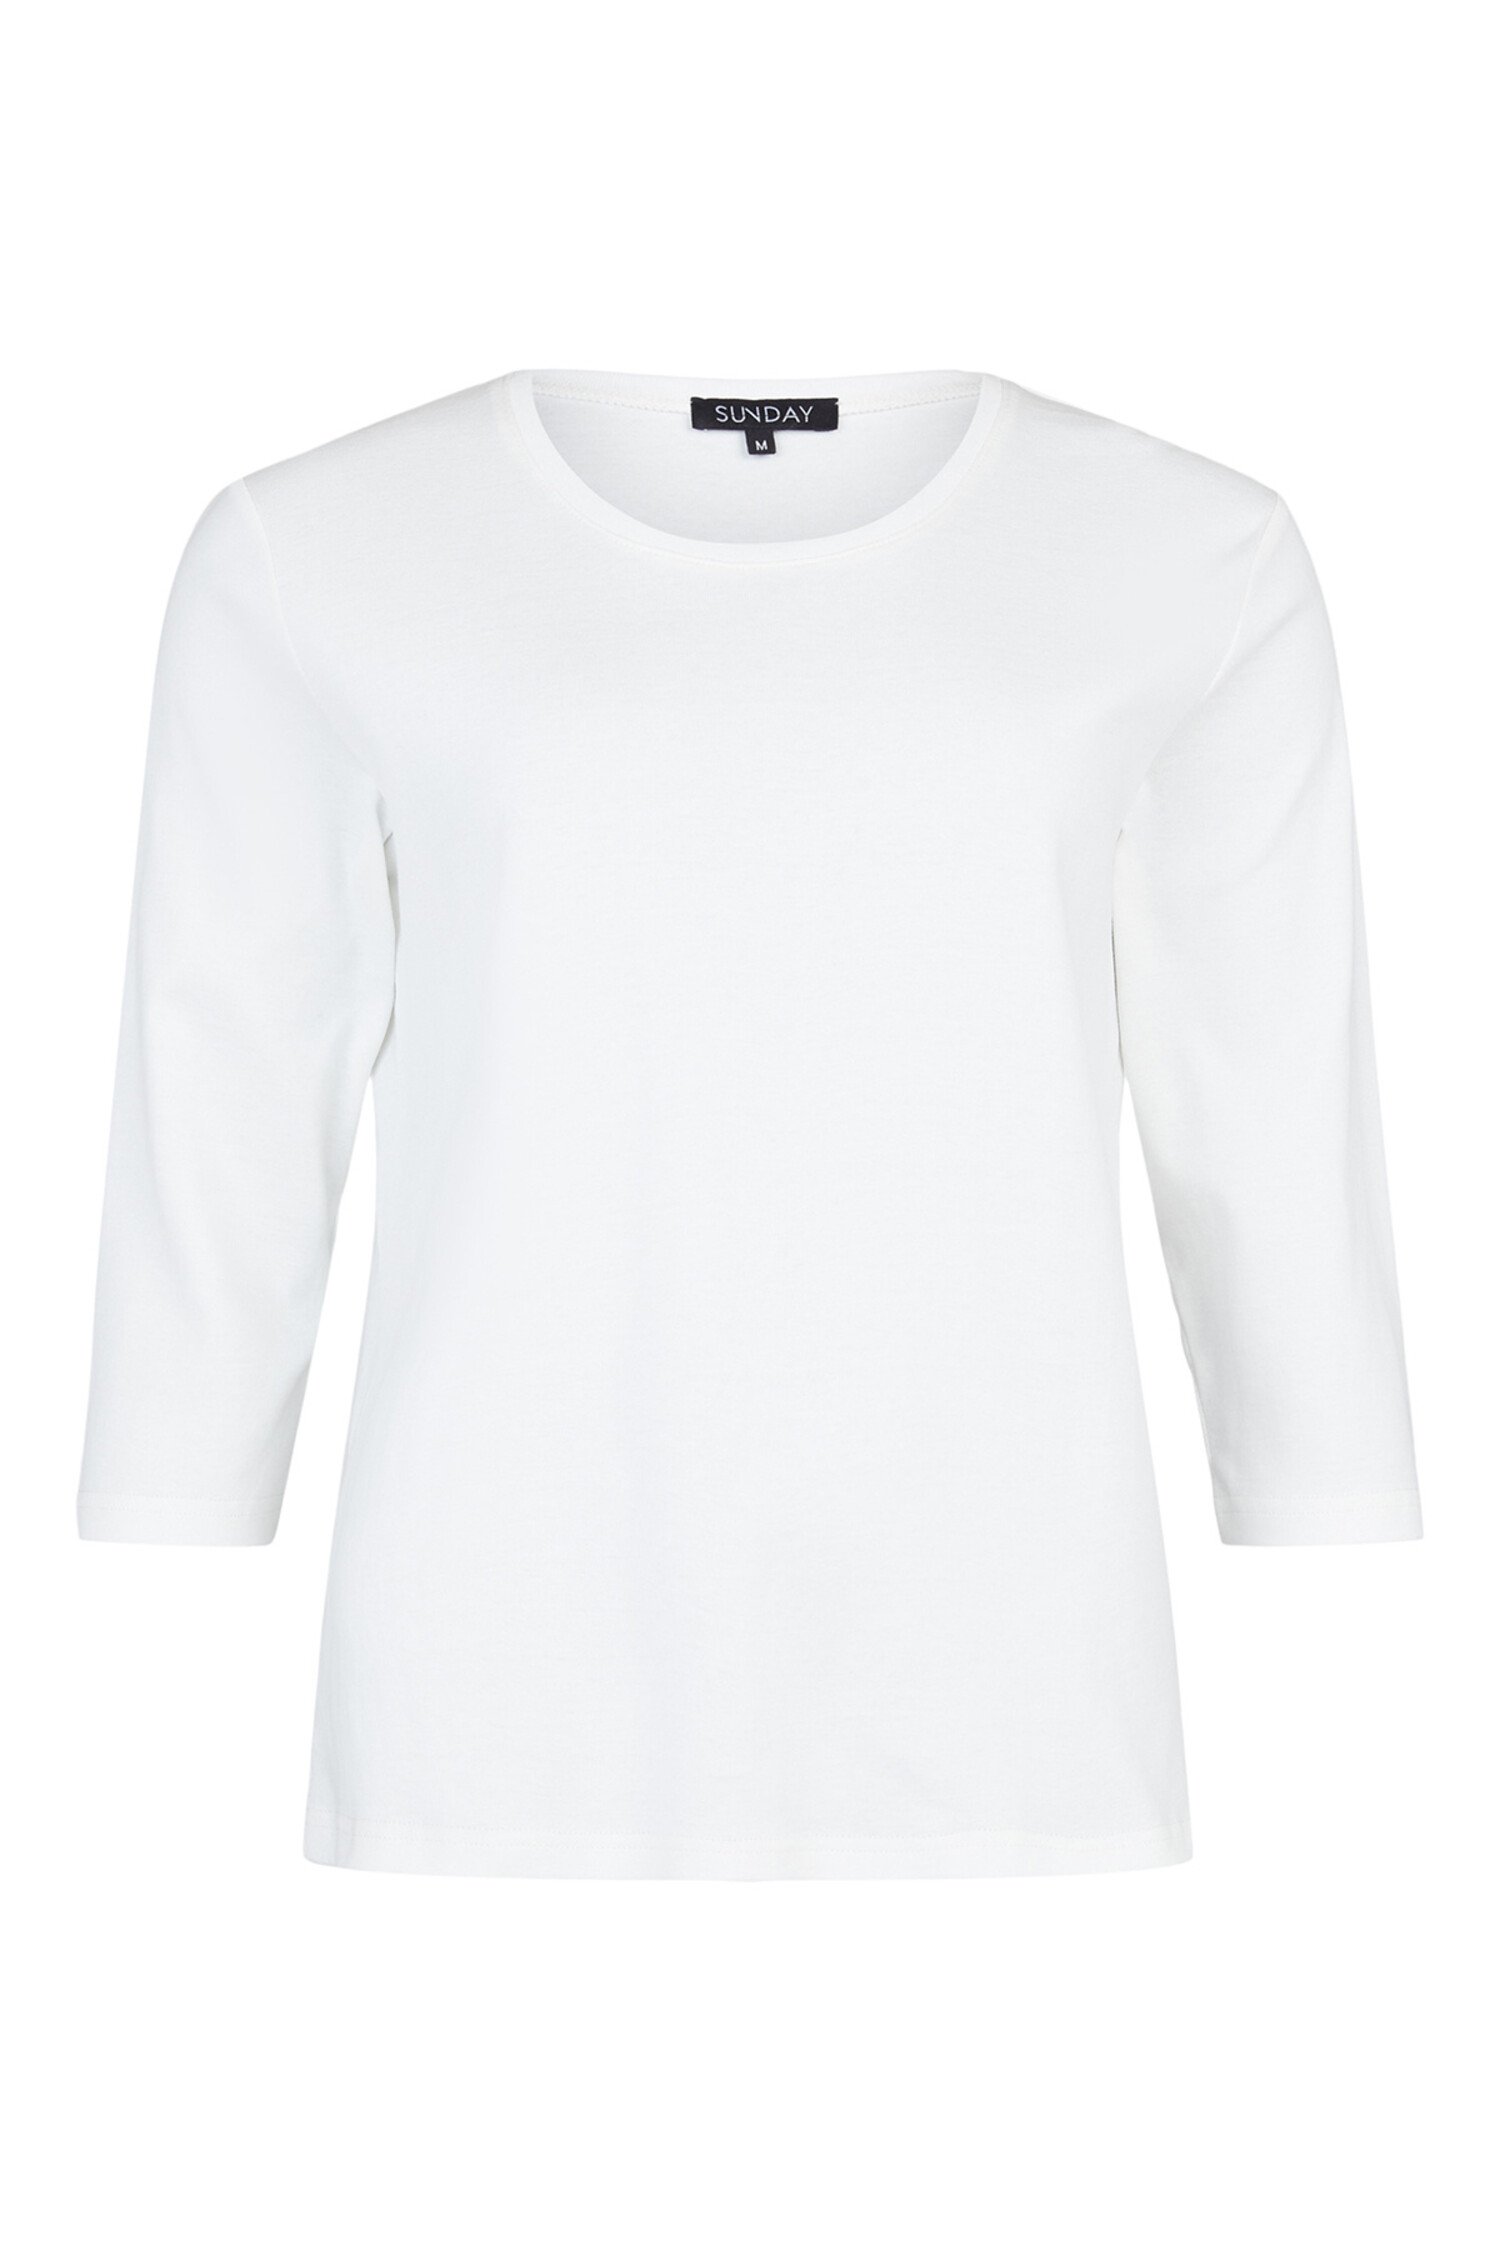 Women's White Fitted 3 Quarter Sleeve Cotton Shirt